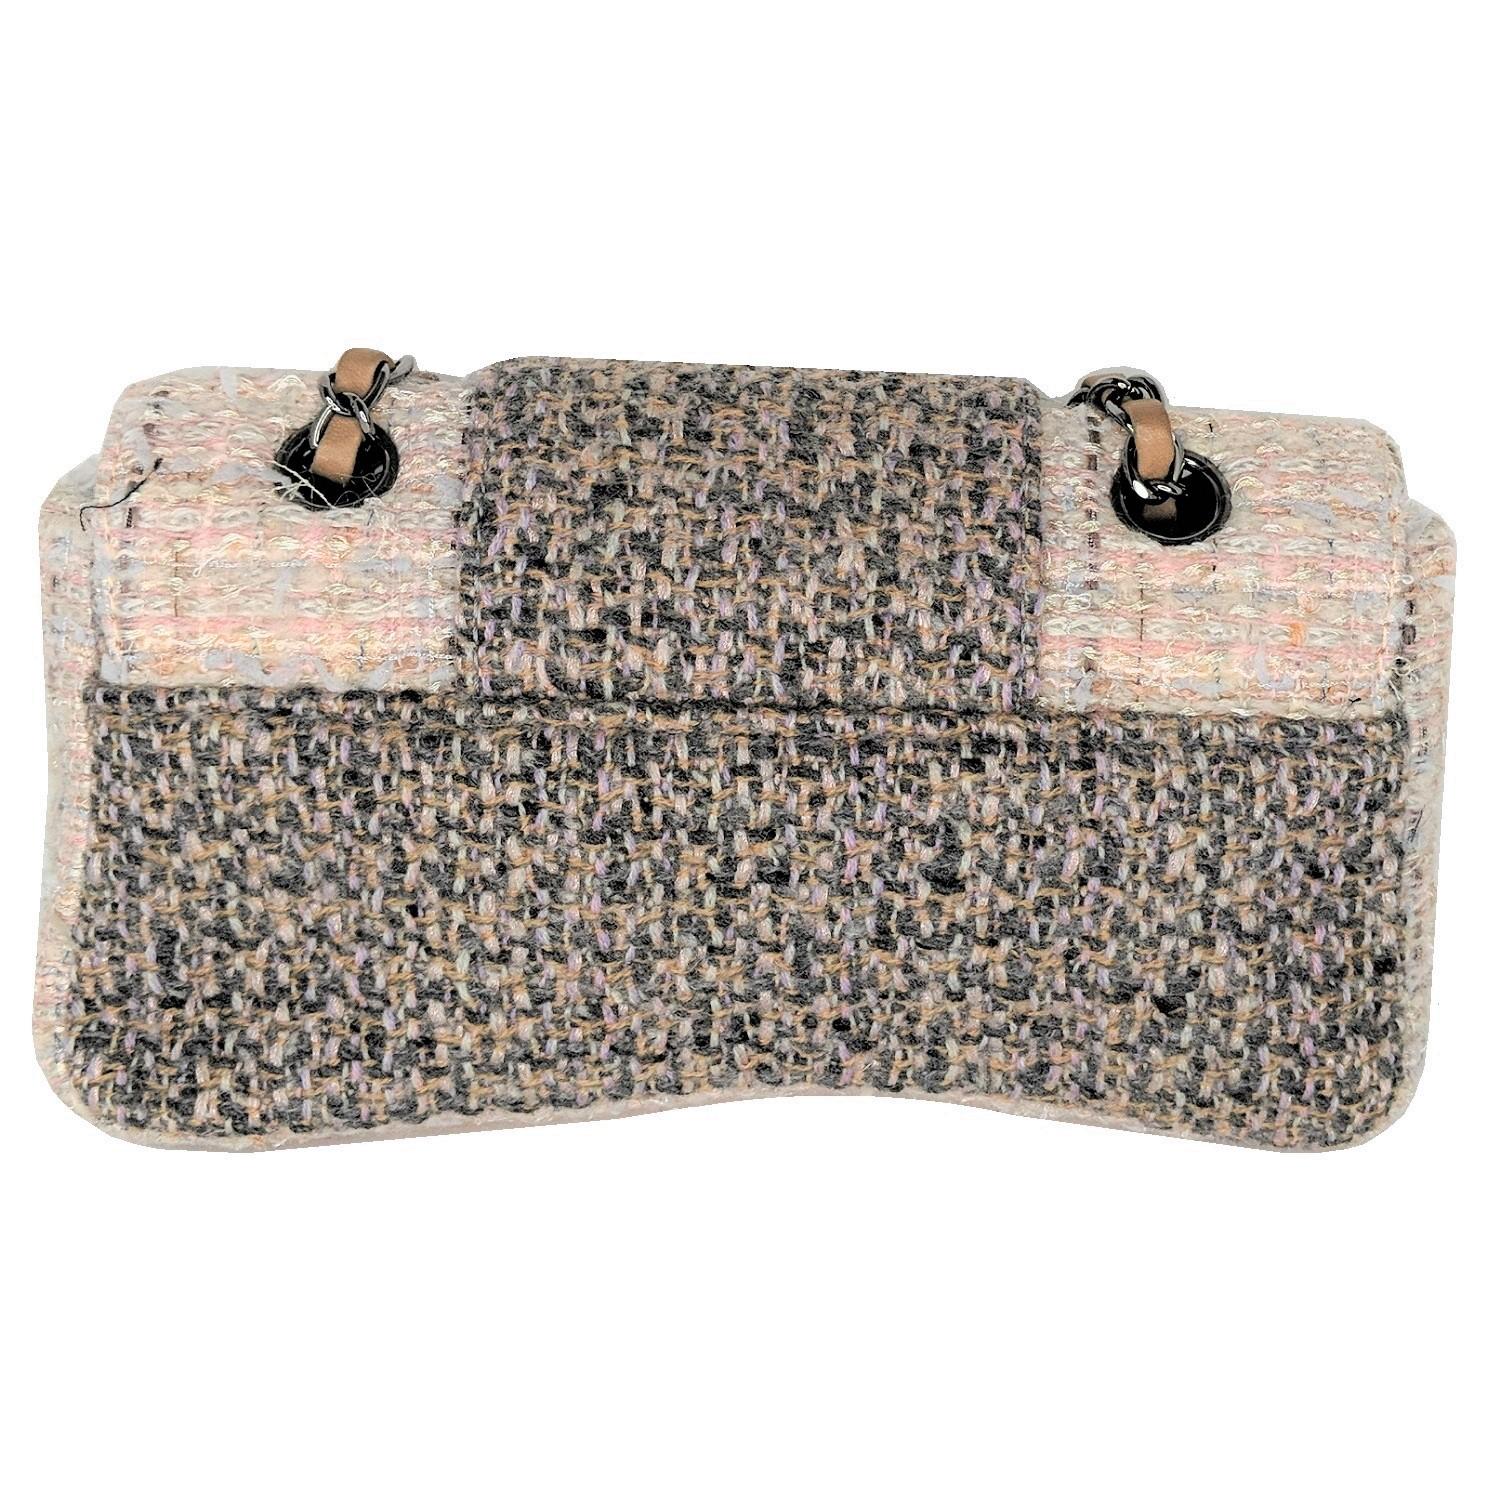 Go in sophisticated style with this Chanel Beige/Brown Tweed Medium Flap Bag. It features a lovely pale beige, brown and white multicolor quilted tweed blend with a flap tab and ruthenium-tone turn-lock CC closure. The feminine touches of this bag